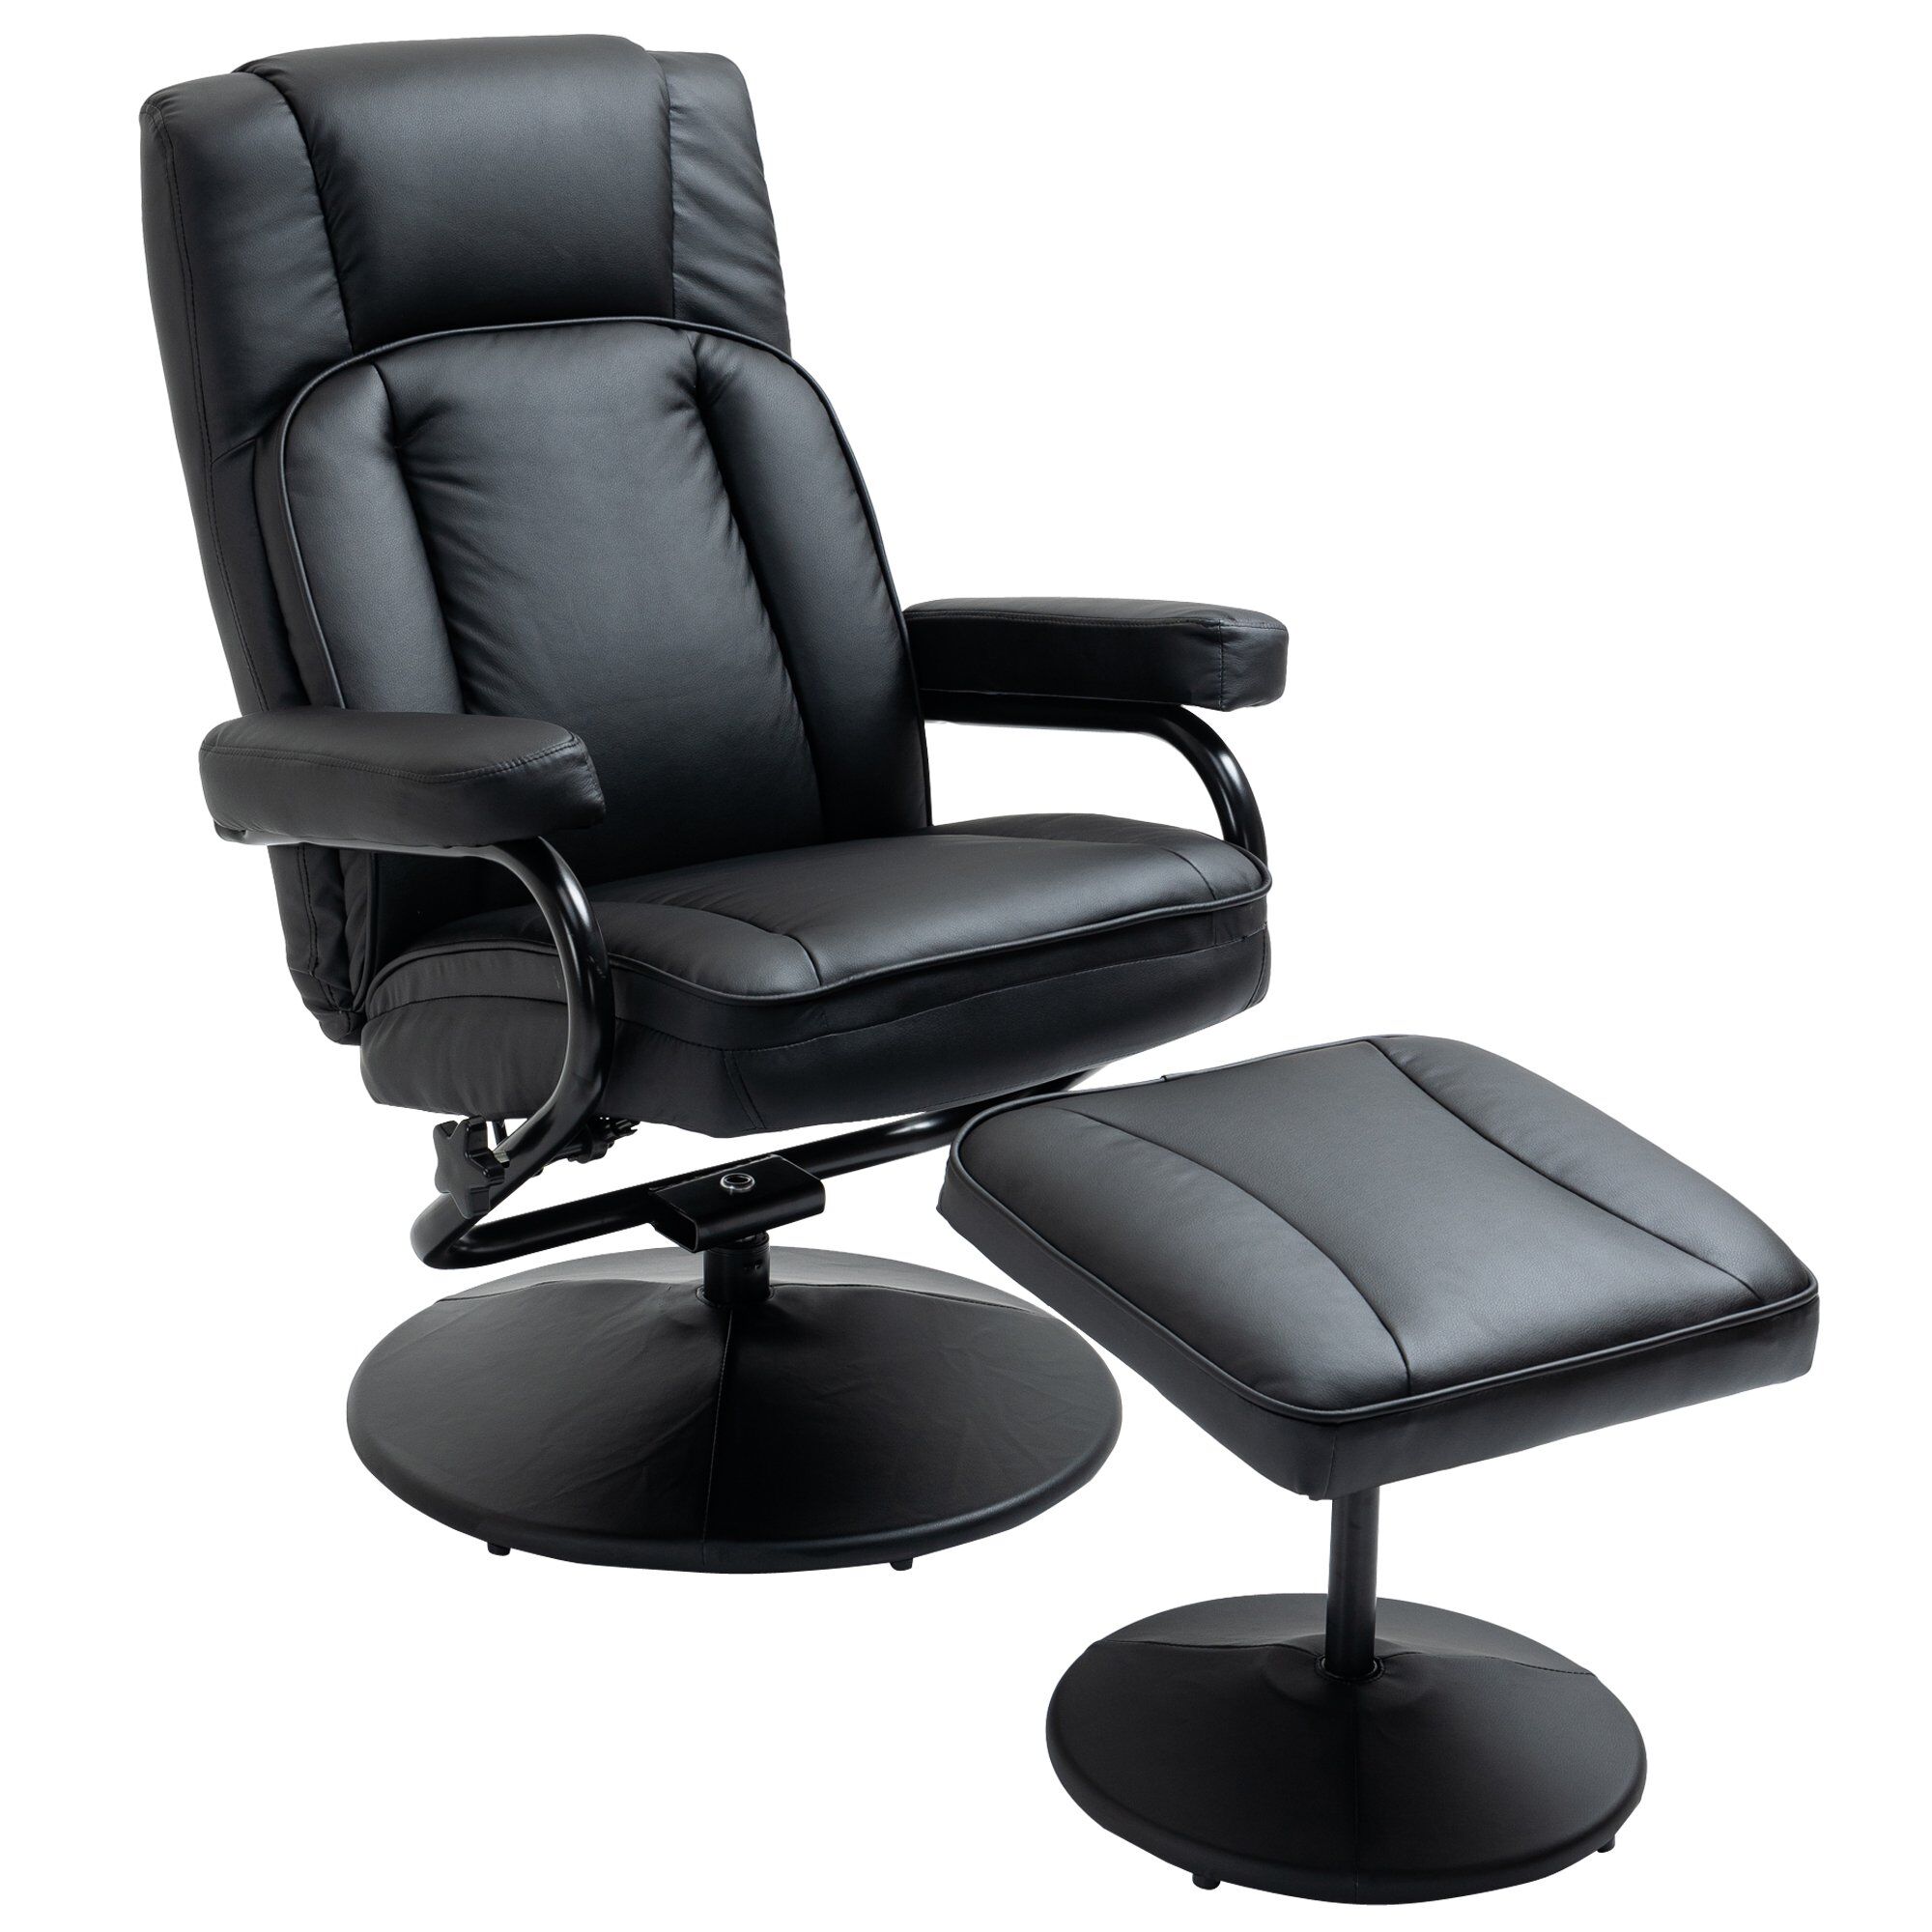 HOMCOM Swivel Recliner Black Manual PU Leather Armchair with Ottoman for Living Room Office Bedroom   Aosom.com